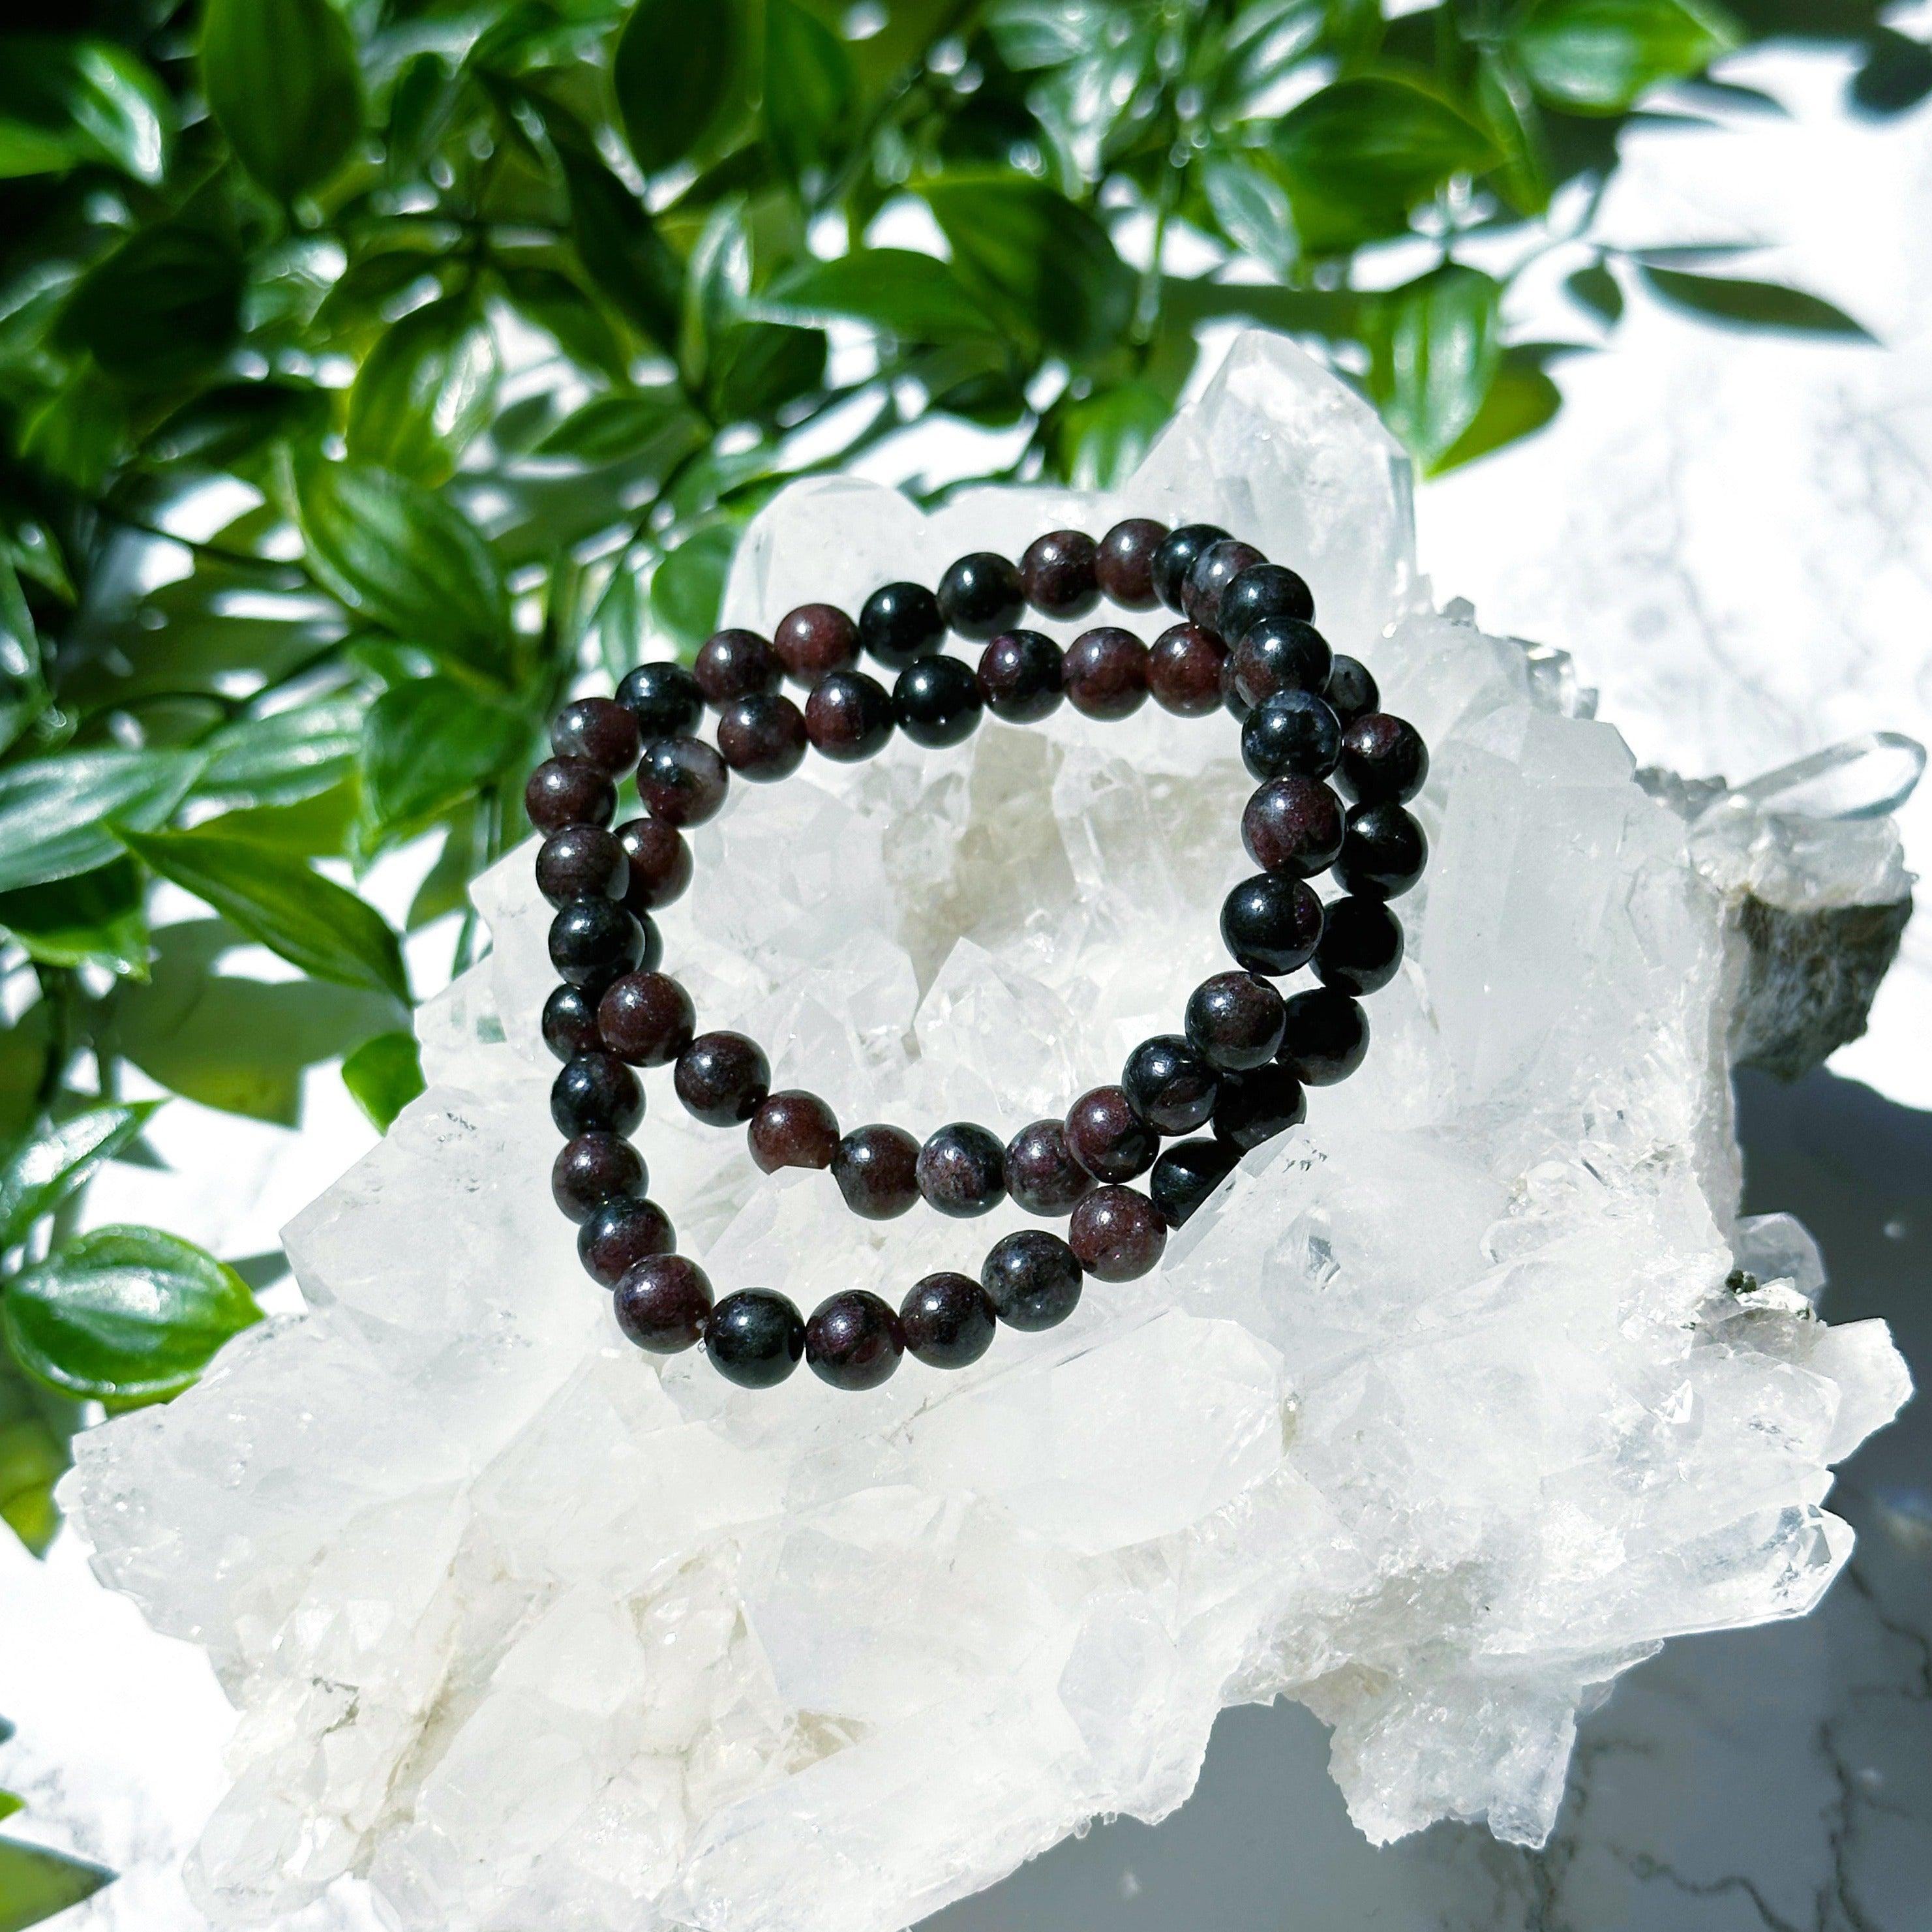 GARNET IN ARFVEDSONITE 6mm - HANDMADE CRYSTAL BRACELET - 6mm, april astro, aquarius, aquarius stack, arfvedsonite, black, bracelet, capricorn, capricorn stack, crystal bracelet, earth, fire, garnet, handmade bracelet, jewelry, leo, leo stack, recently added, red, sagittarius, sagittarius stack, summer solstice, virgo, virgo stack, Wearable - The Mineral Maven